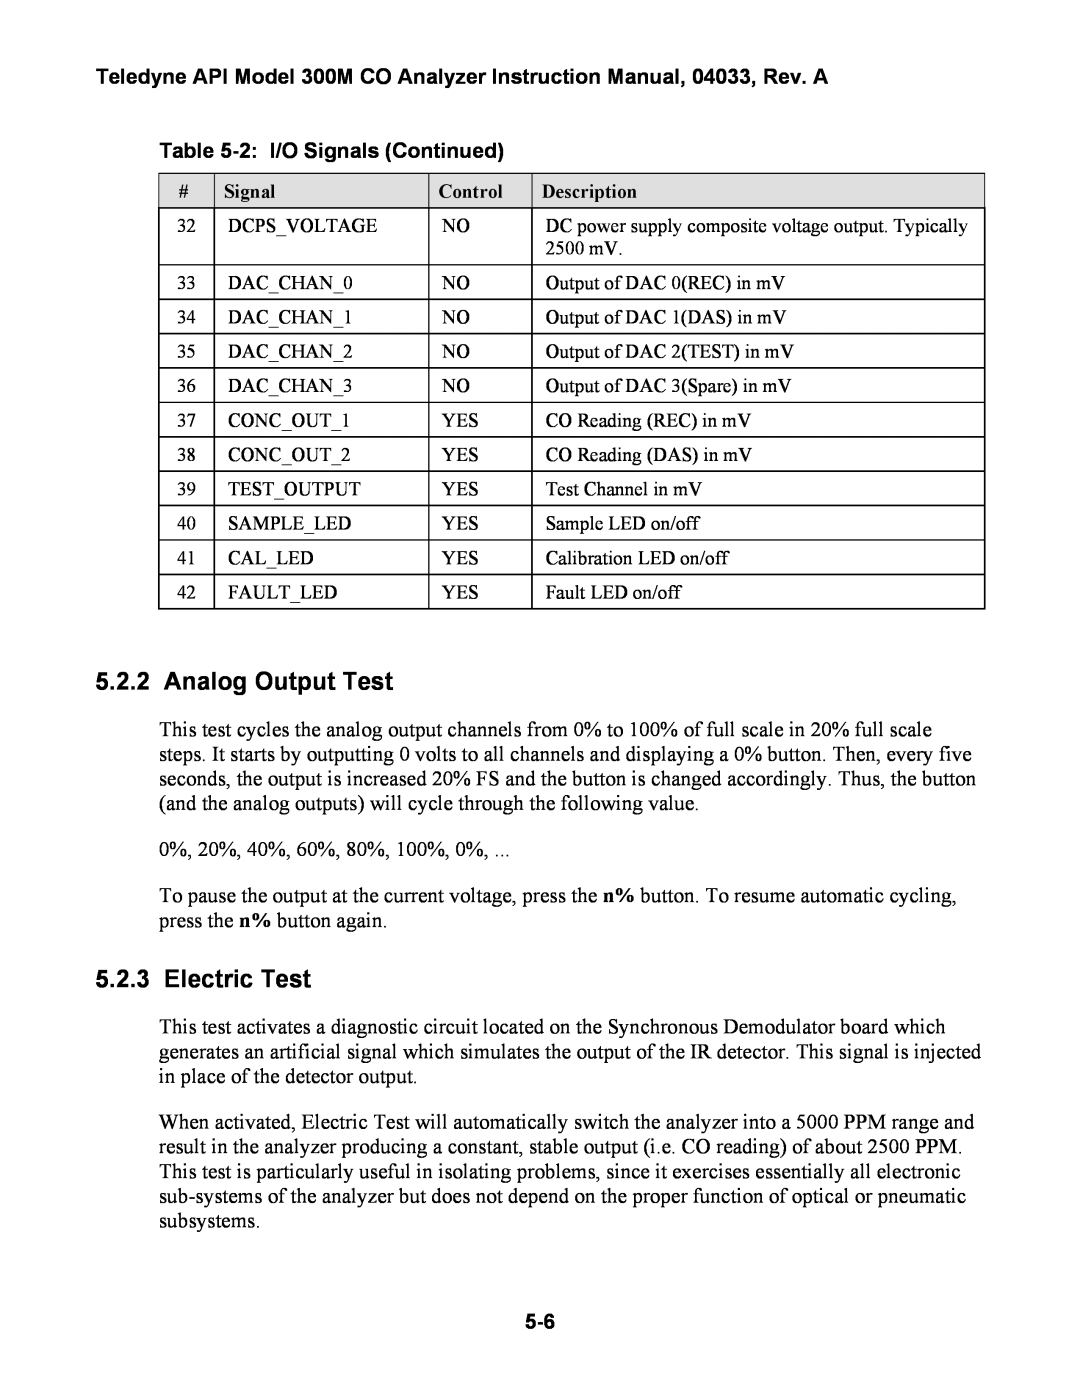 Teledyne 300M instruction manual Analog Output Test, Electric Test, 2 I/O Signals Continued 